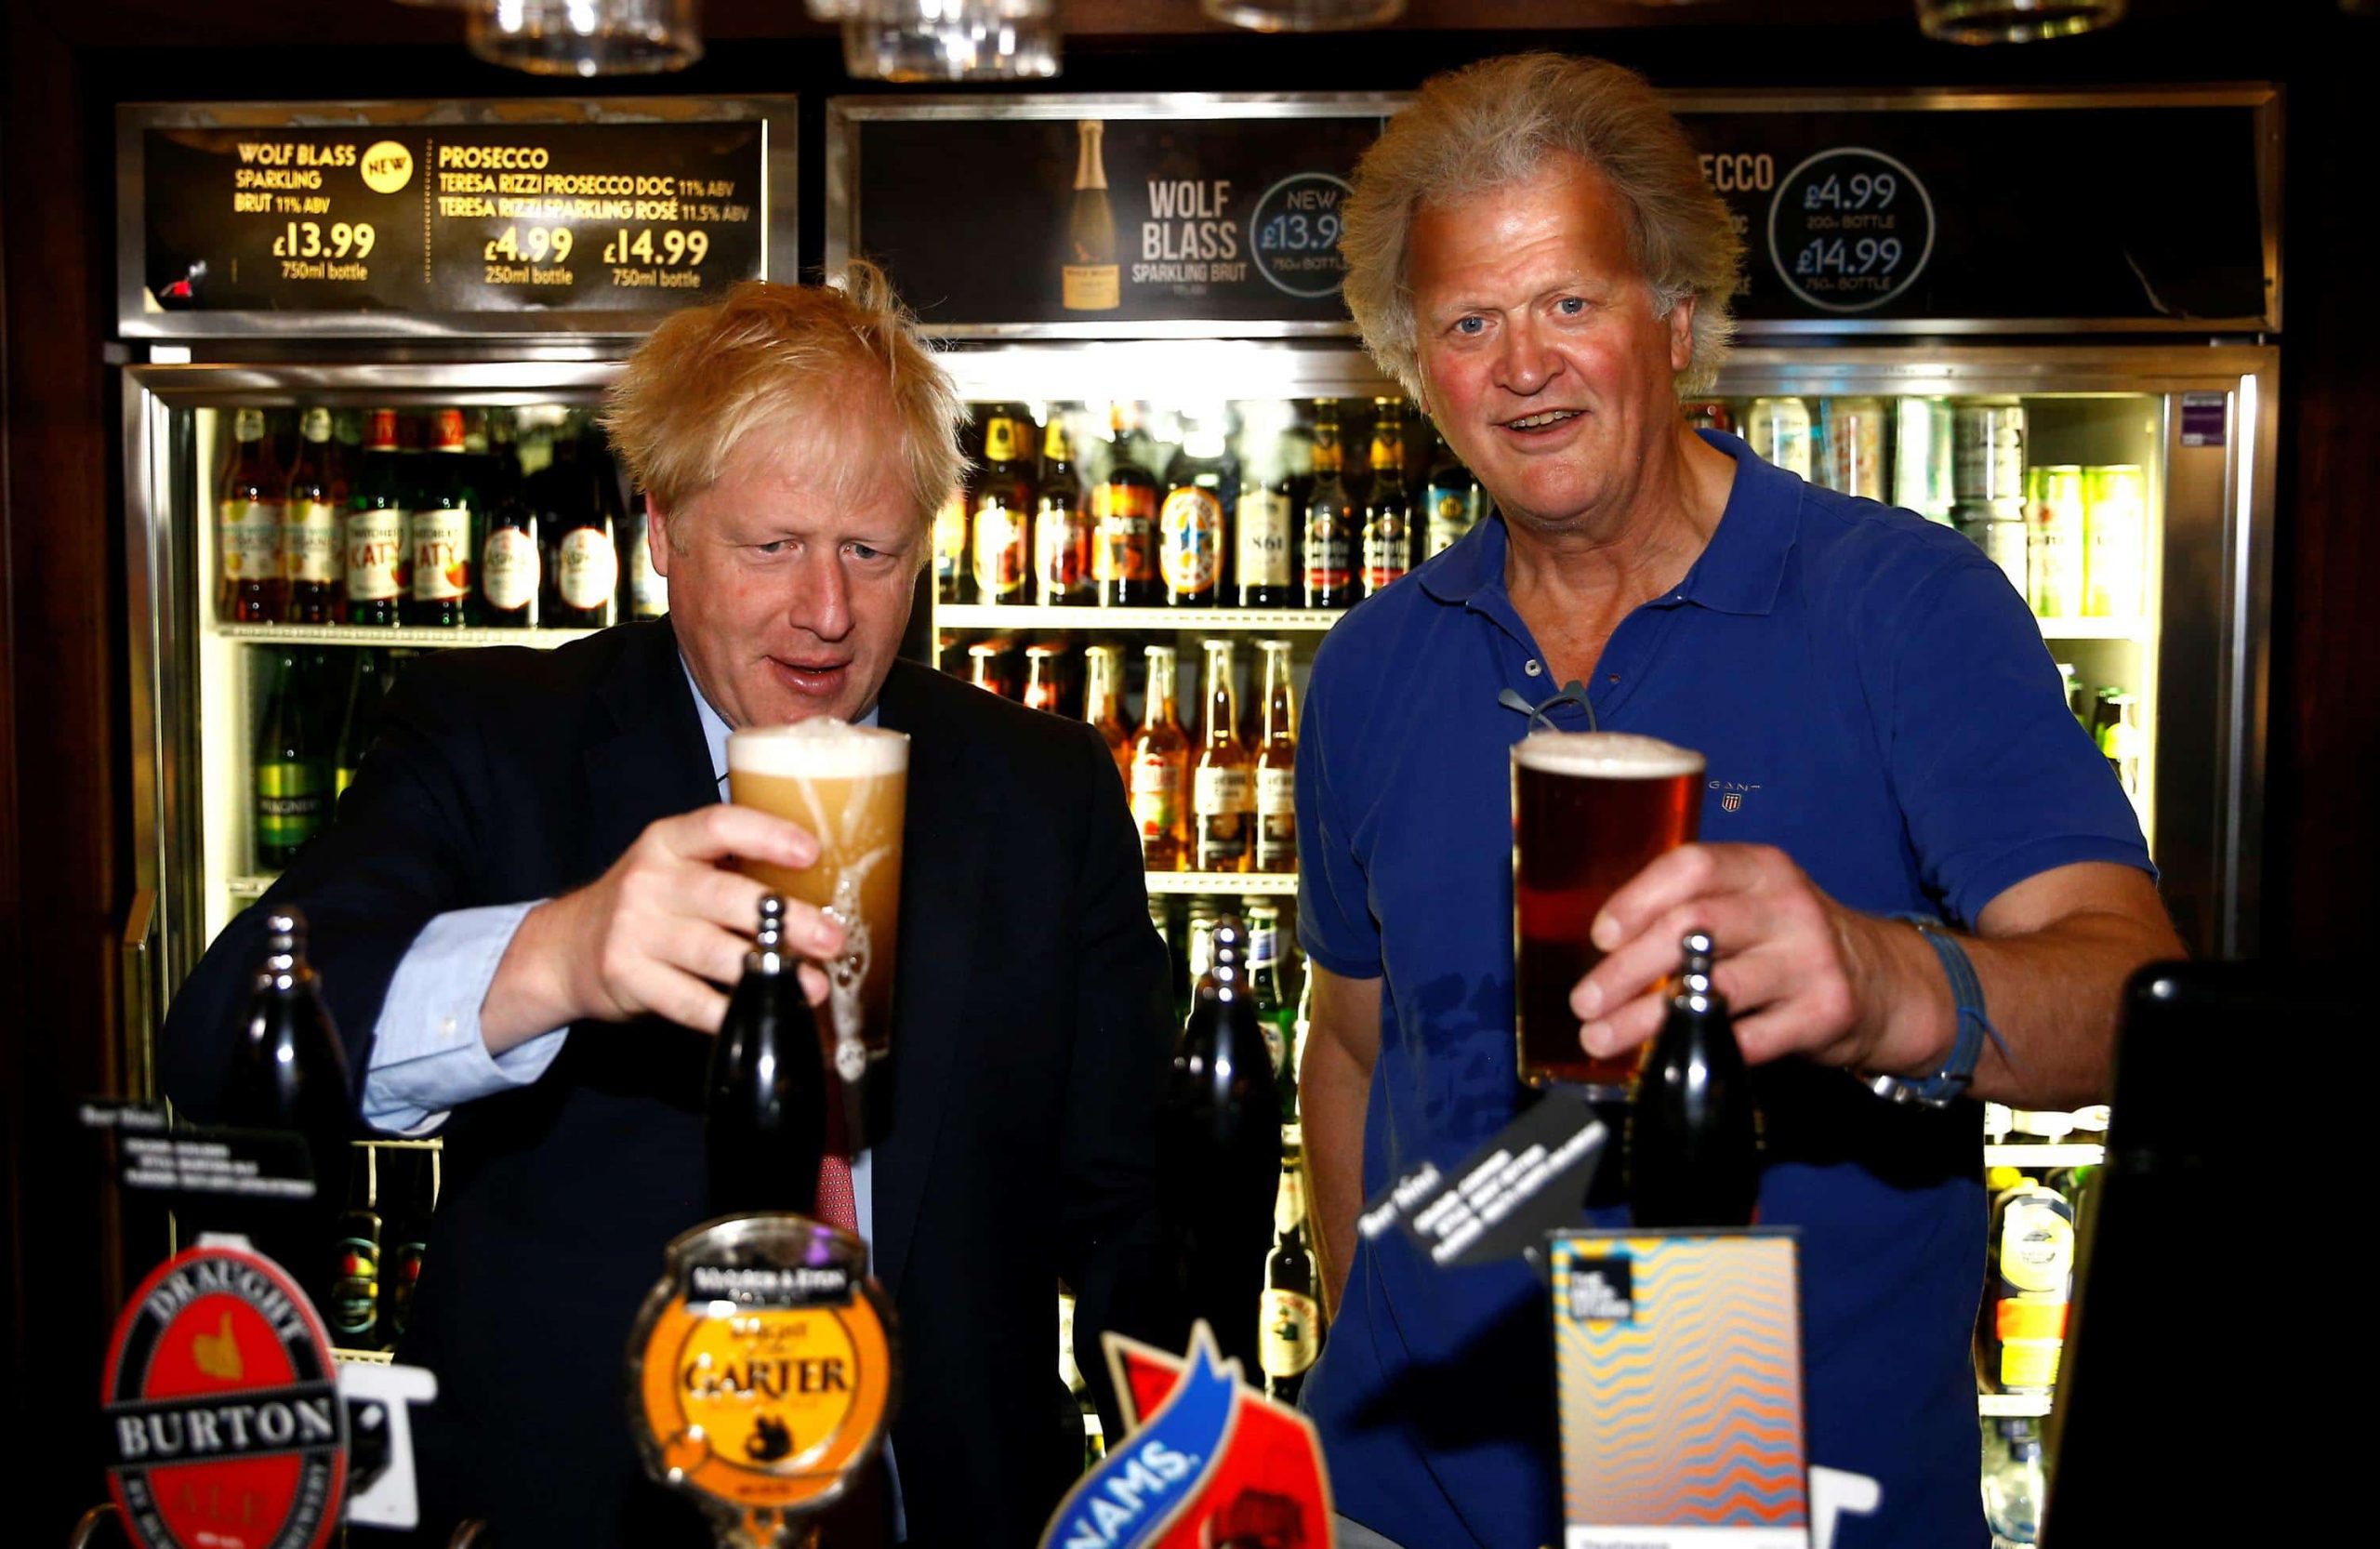 Wetherspoons boss £44m richer after election result